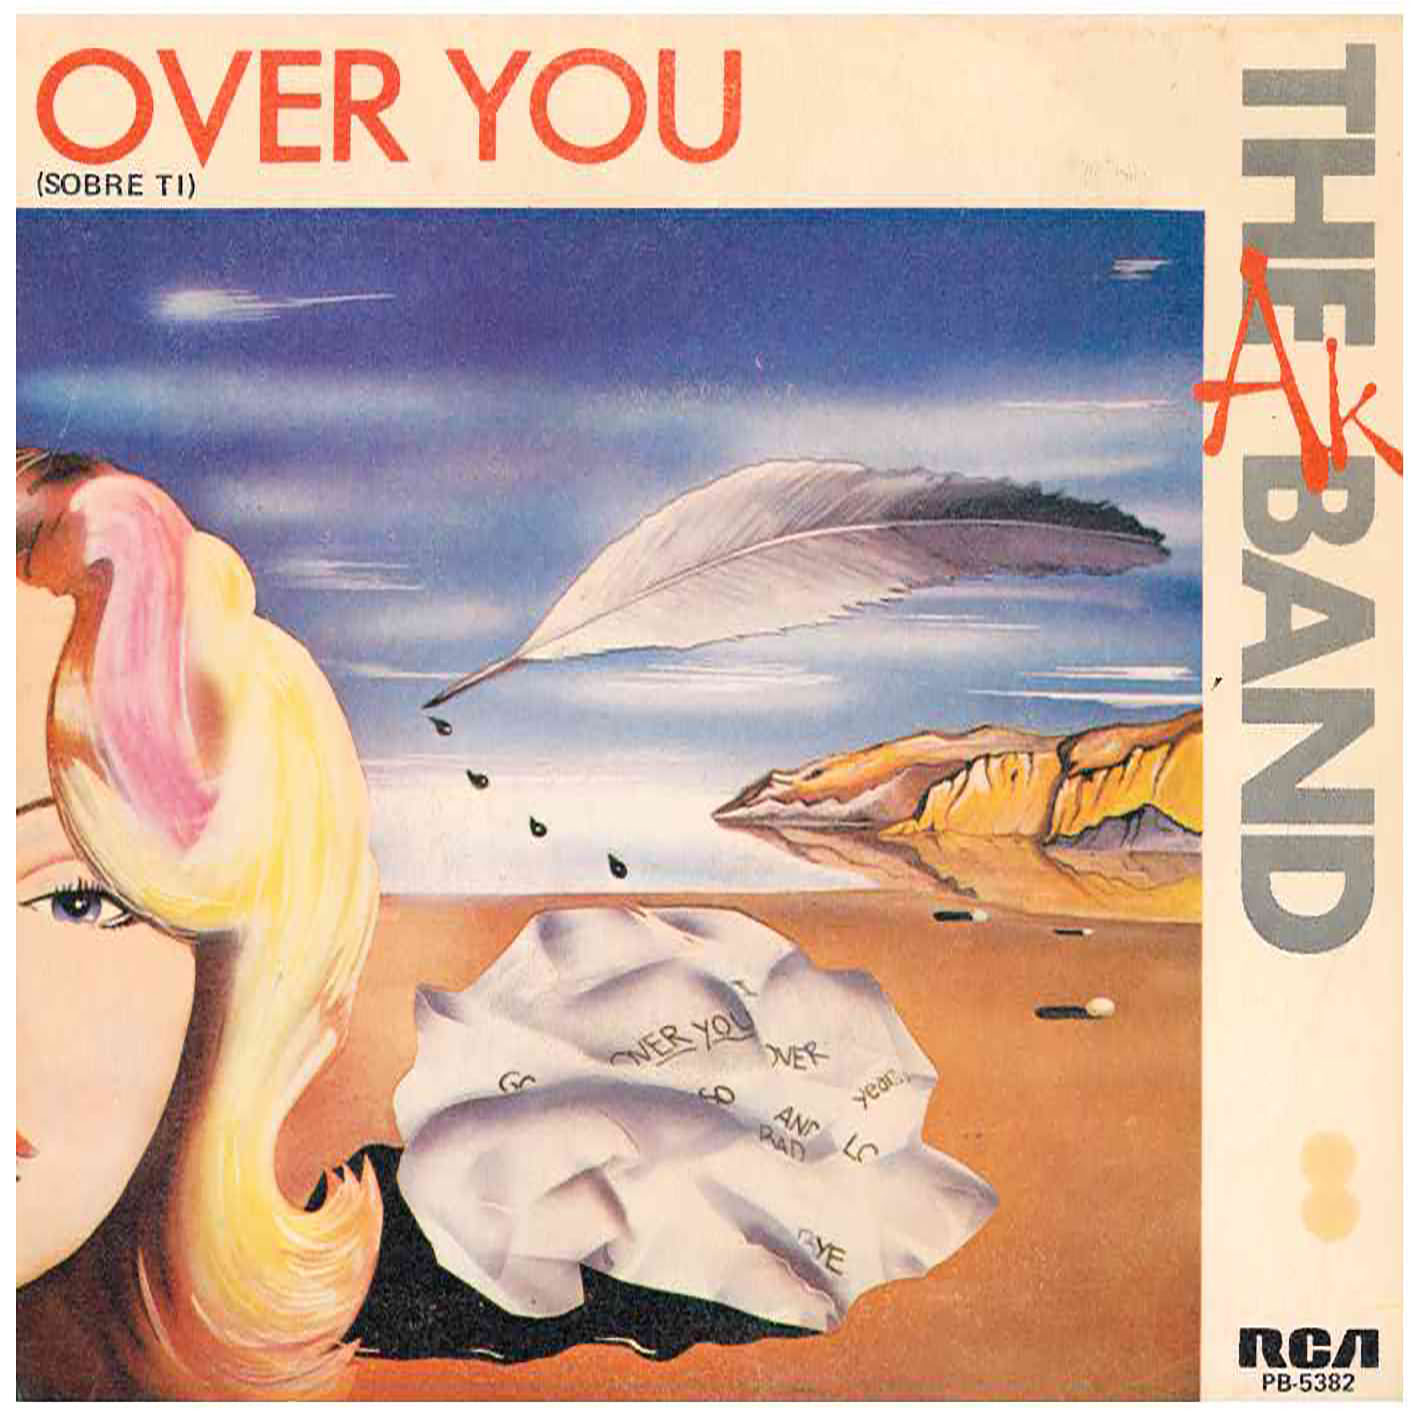 The Ak Band – Over You